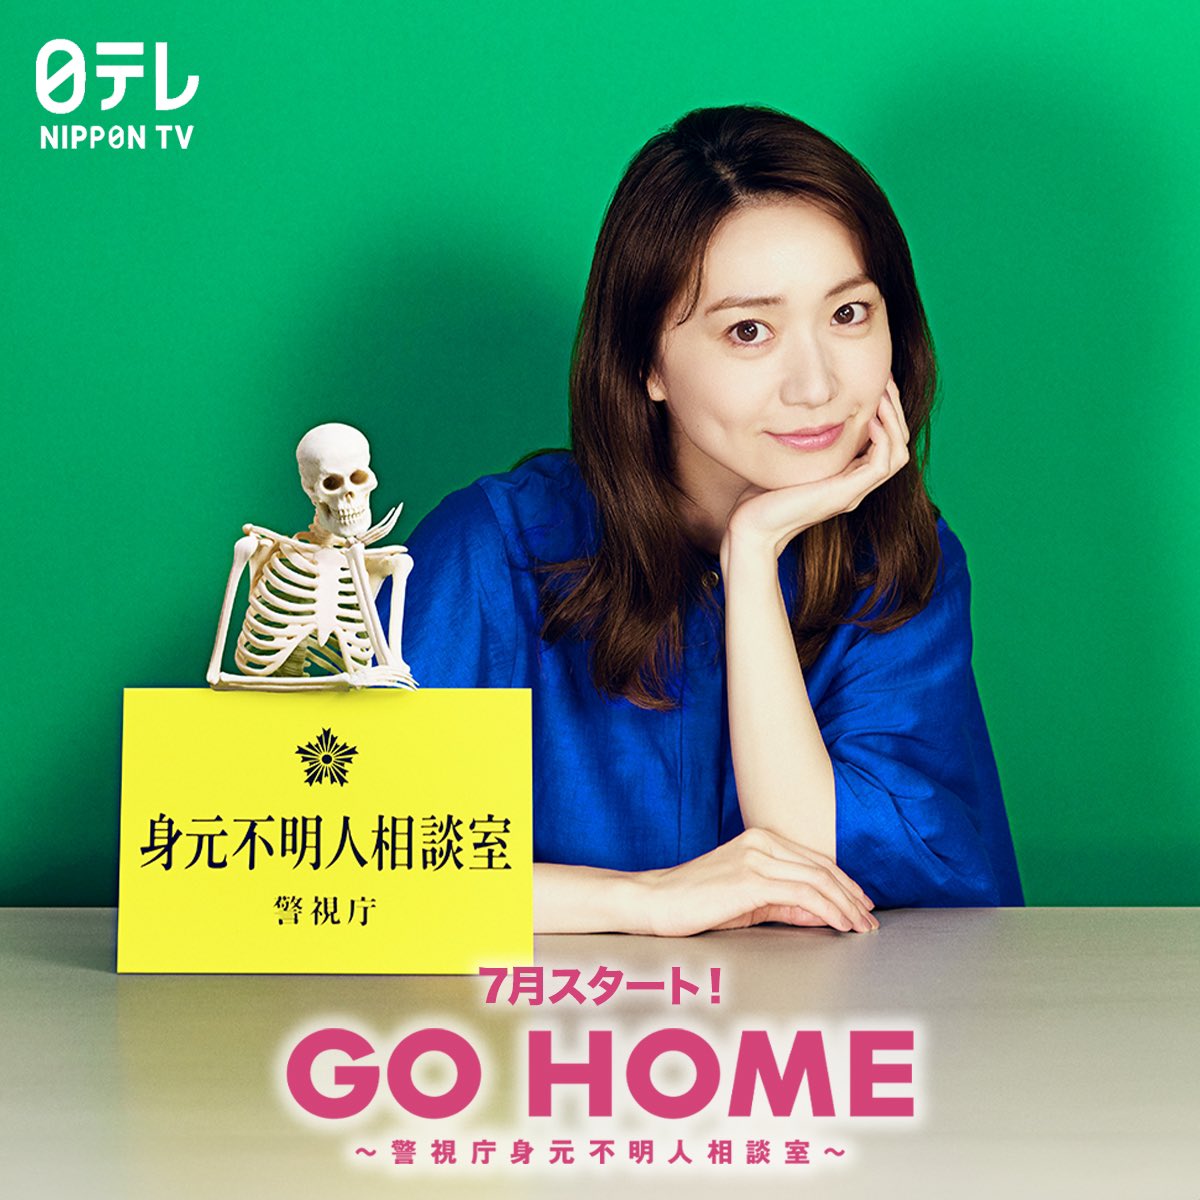 #OshimaYuko joins NTV summer drama 'GO HIME' starring #KoshibaFuka. She will play a reporter who change her job to an investigator and become the heroine partner at her job to identified the nameless bodies. Starts in July. #大島優子 #GOHOME